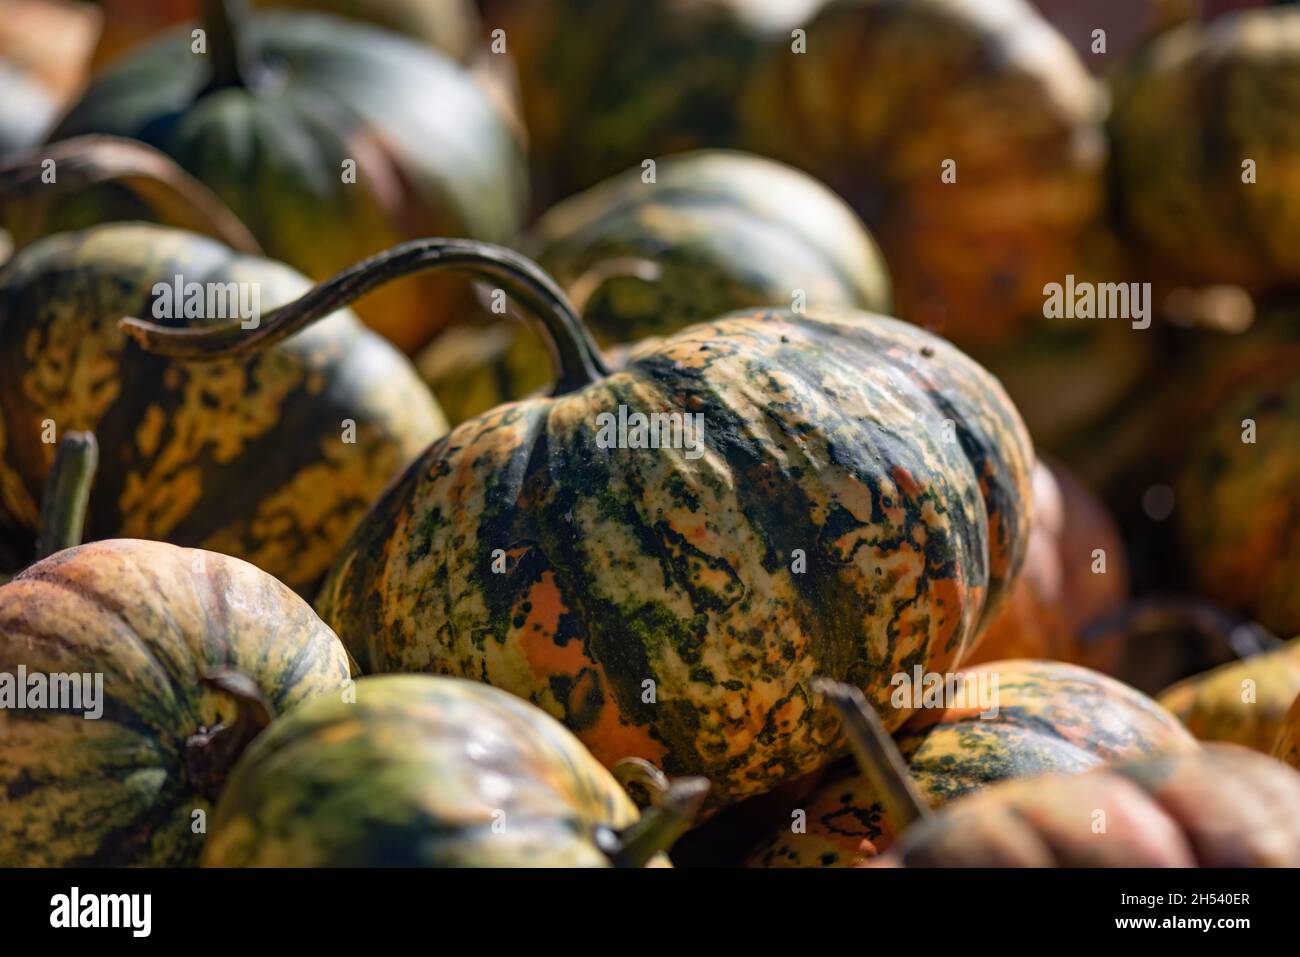 A pile of gourds in various colors Stock Photo